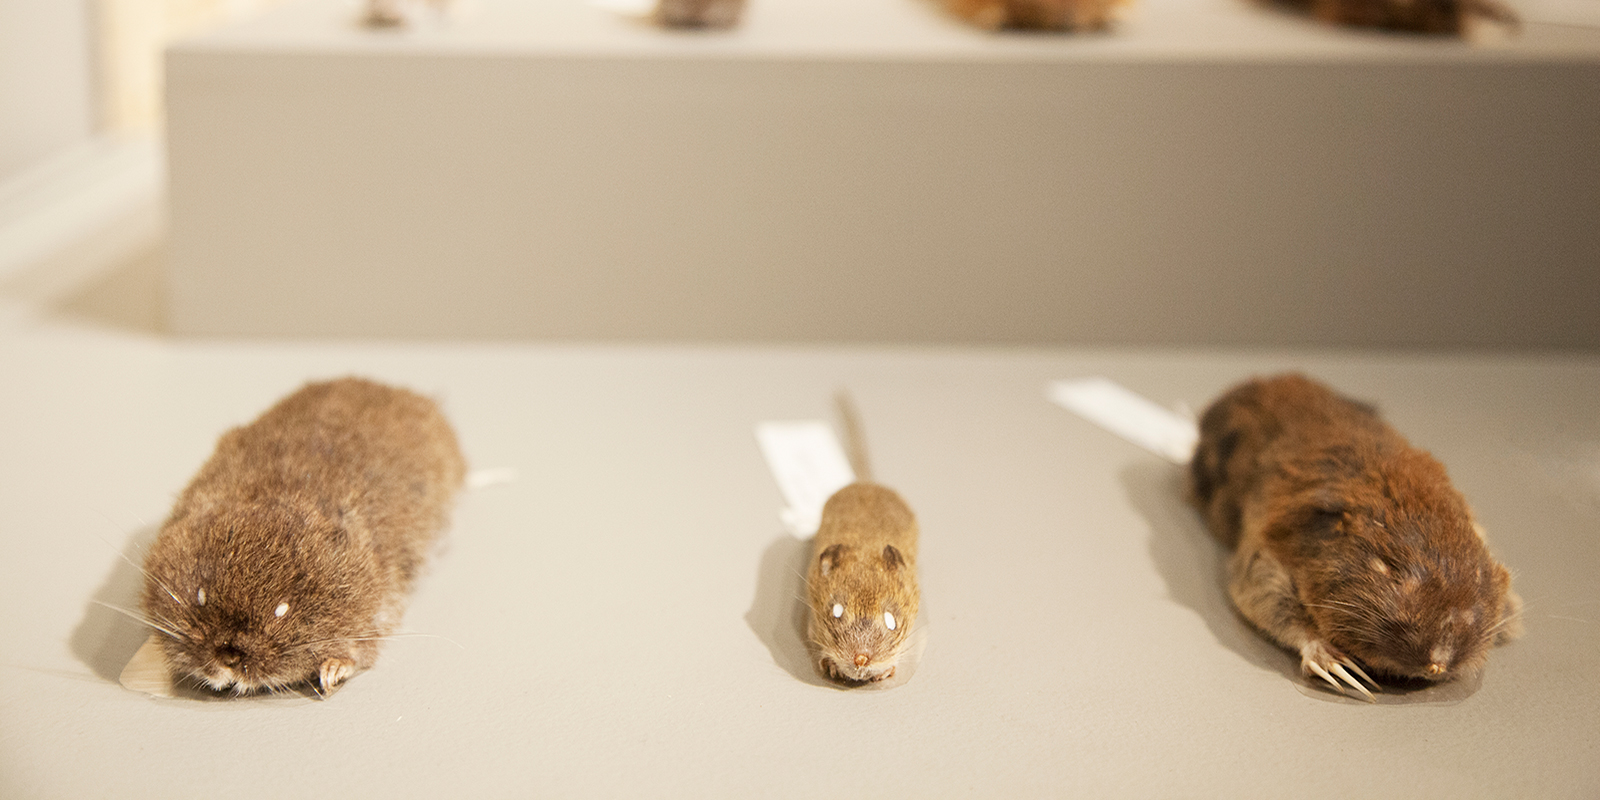 stuffed mammal specimens dry out after being prepared in the exhibit